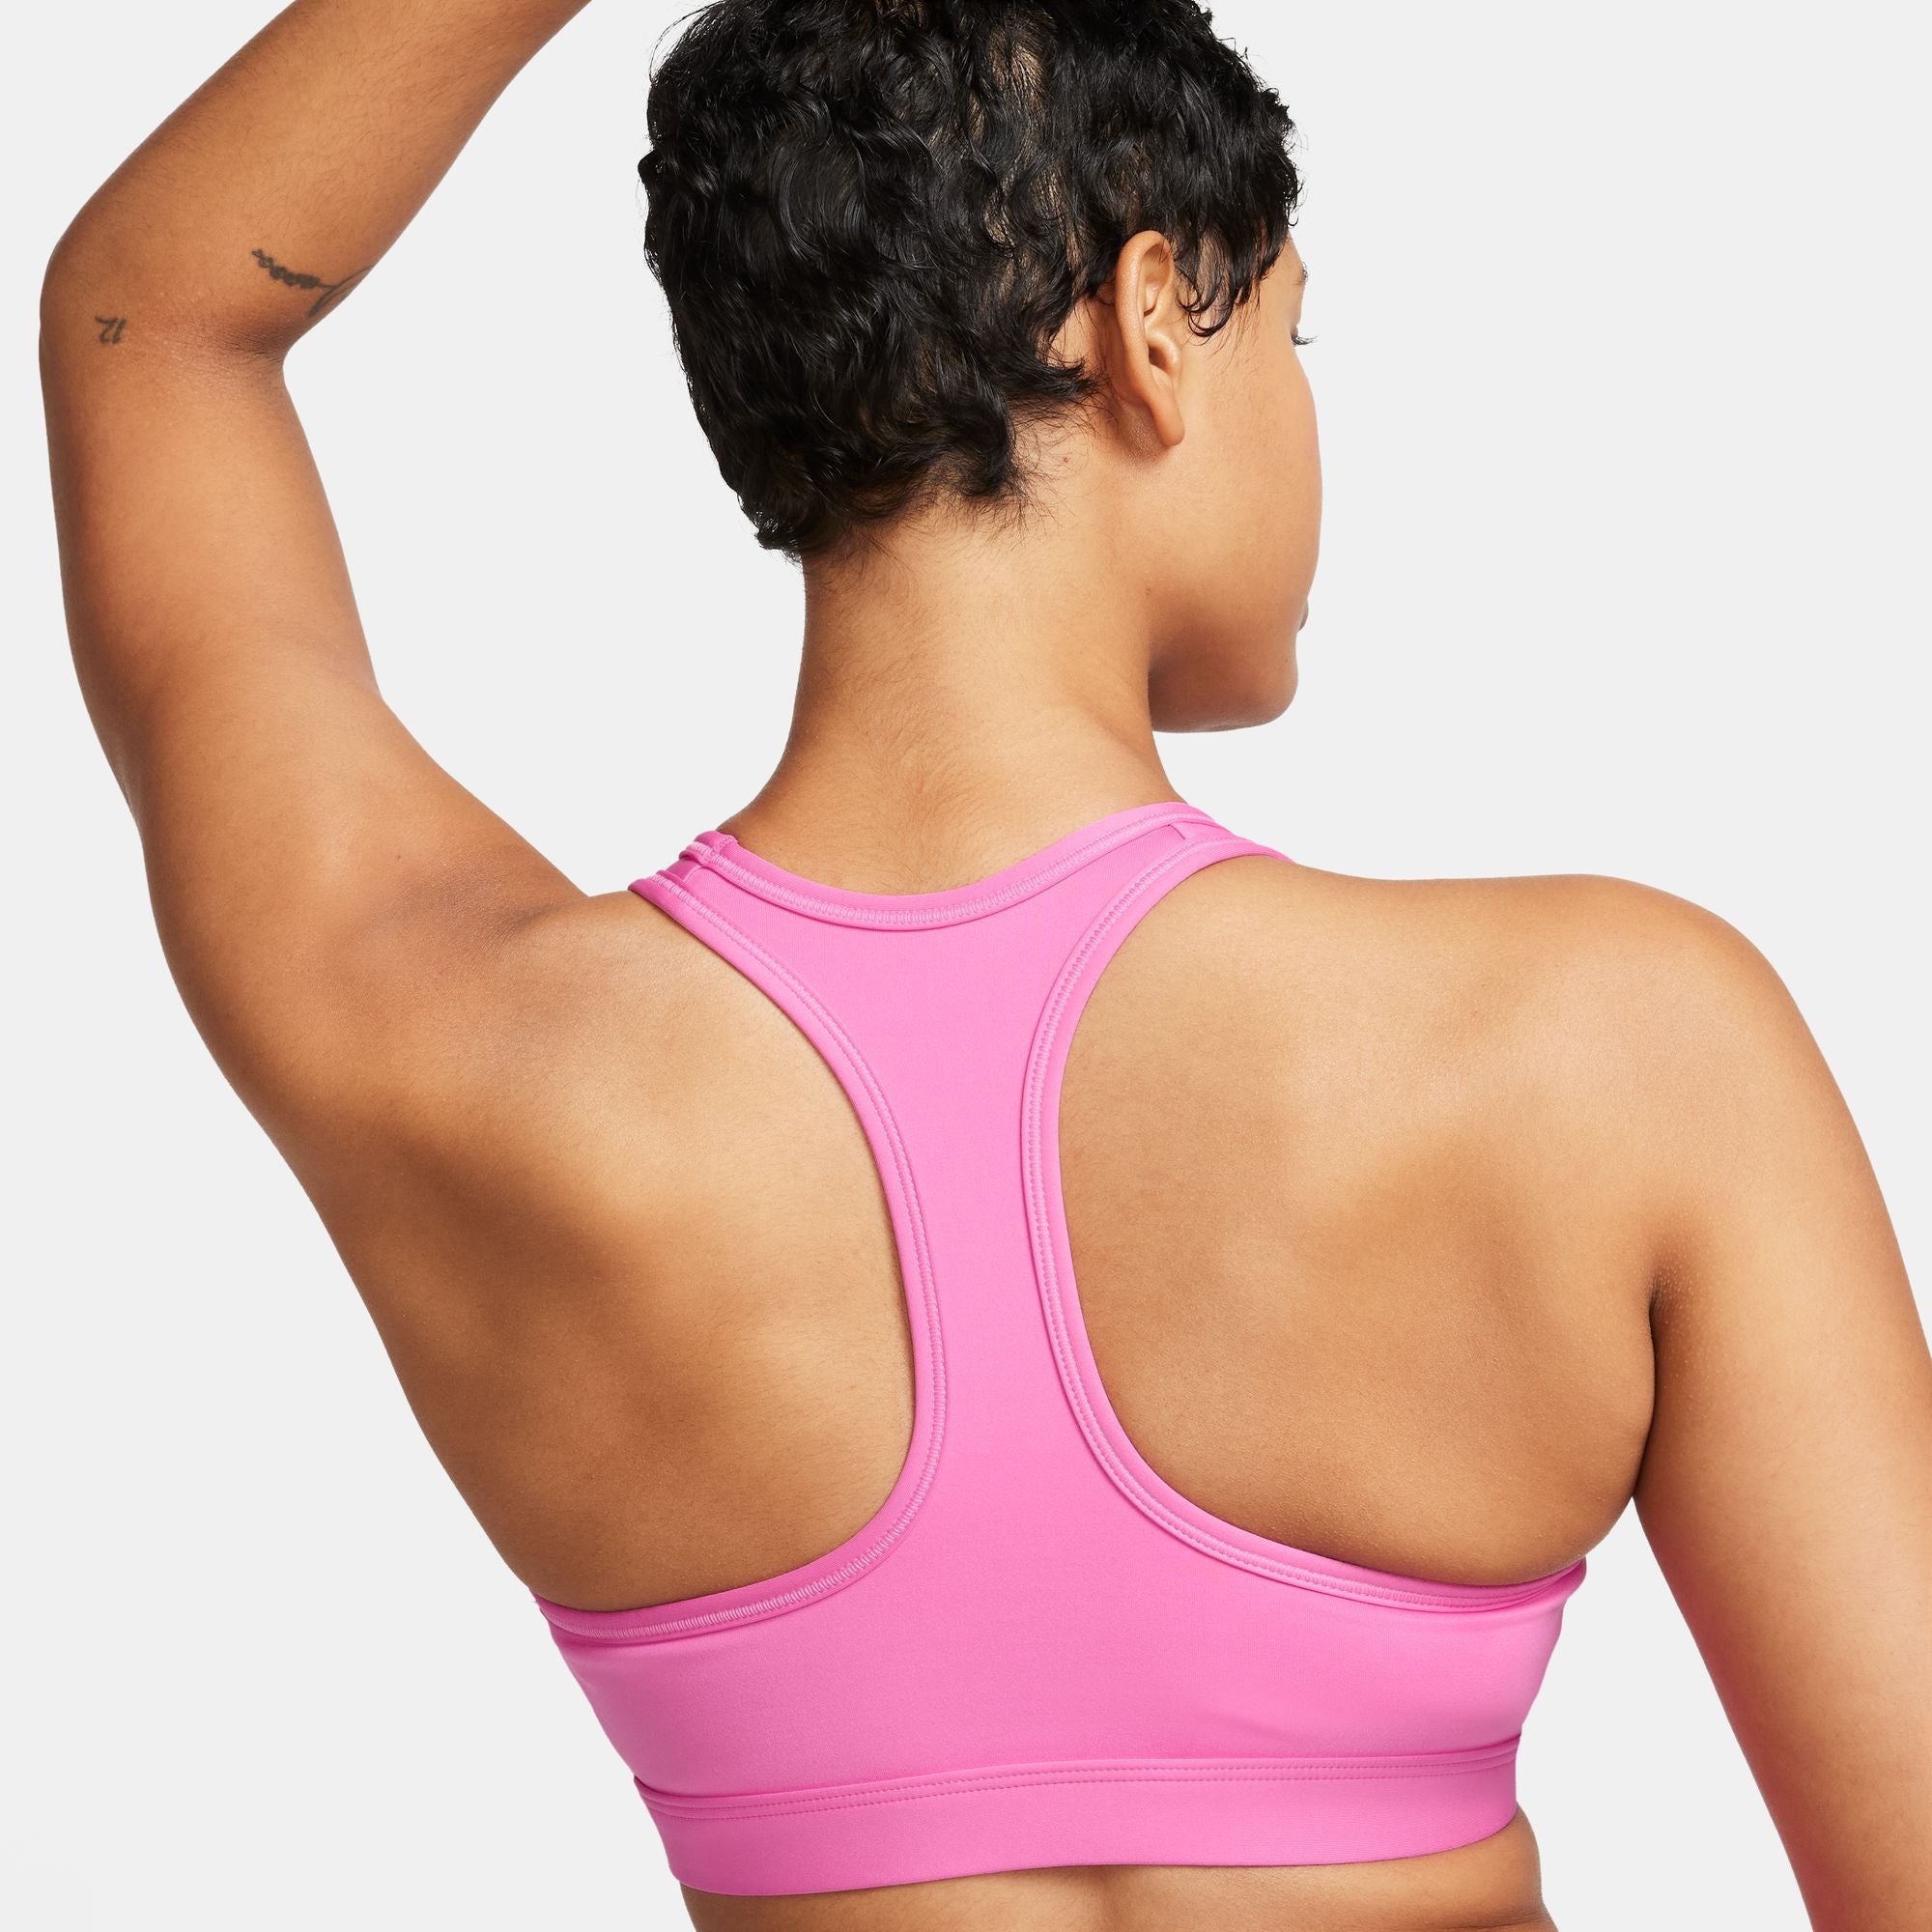 Super Soft Strappy Back Bra Color Theory - Happy Pink, Women's Sports Bras